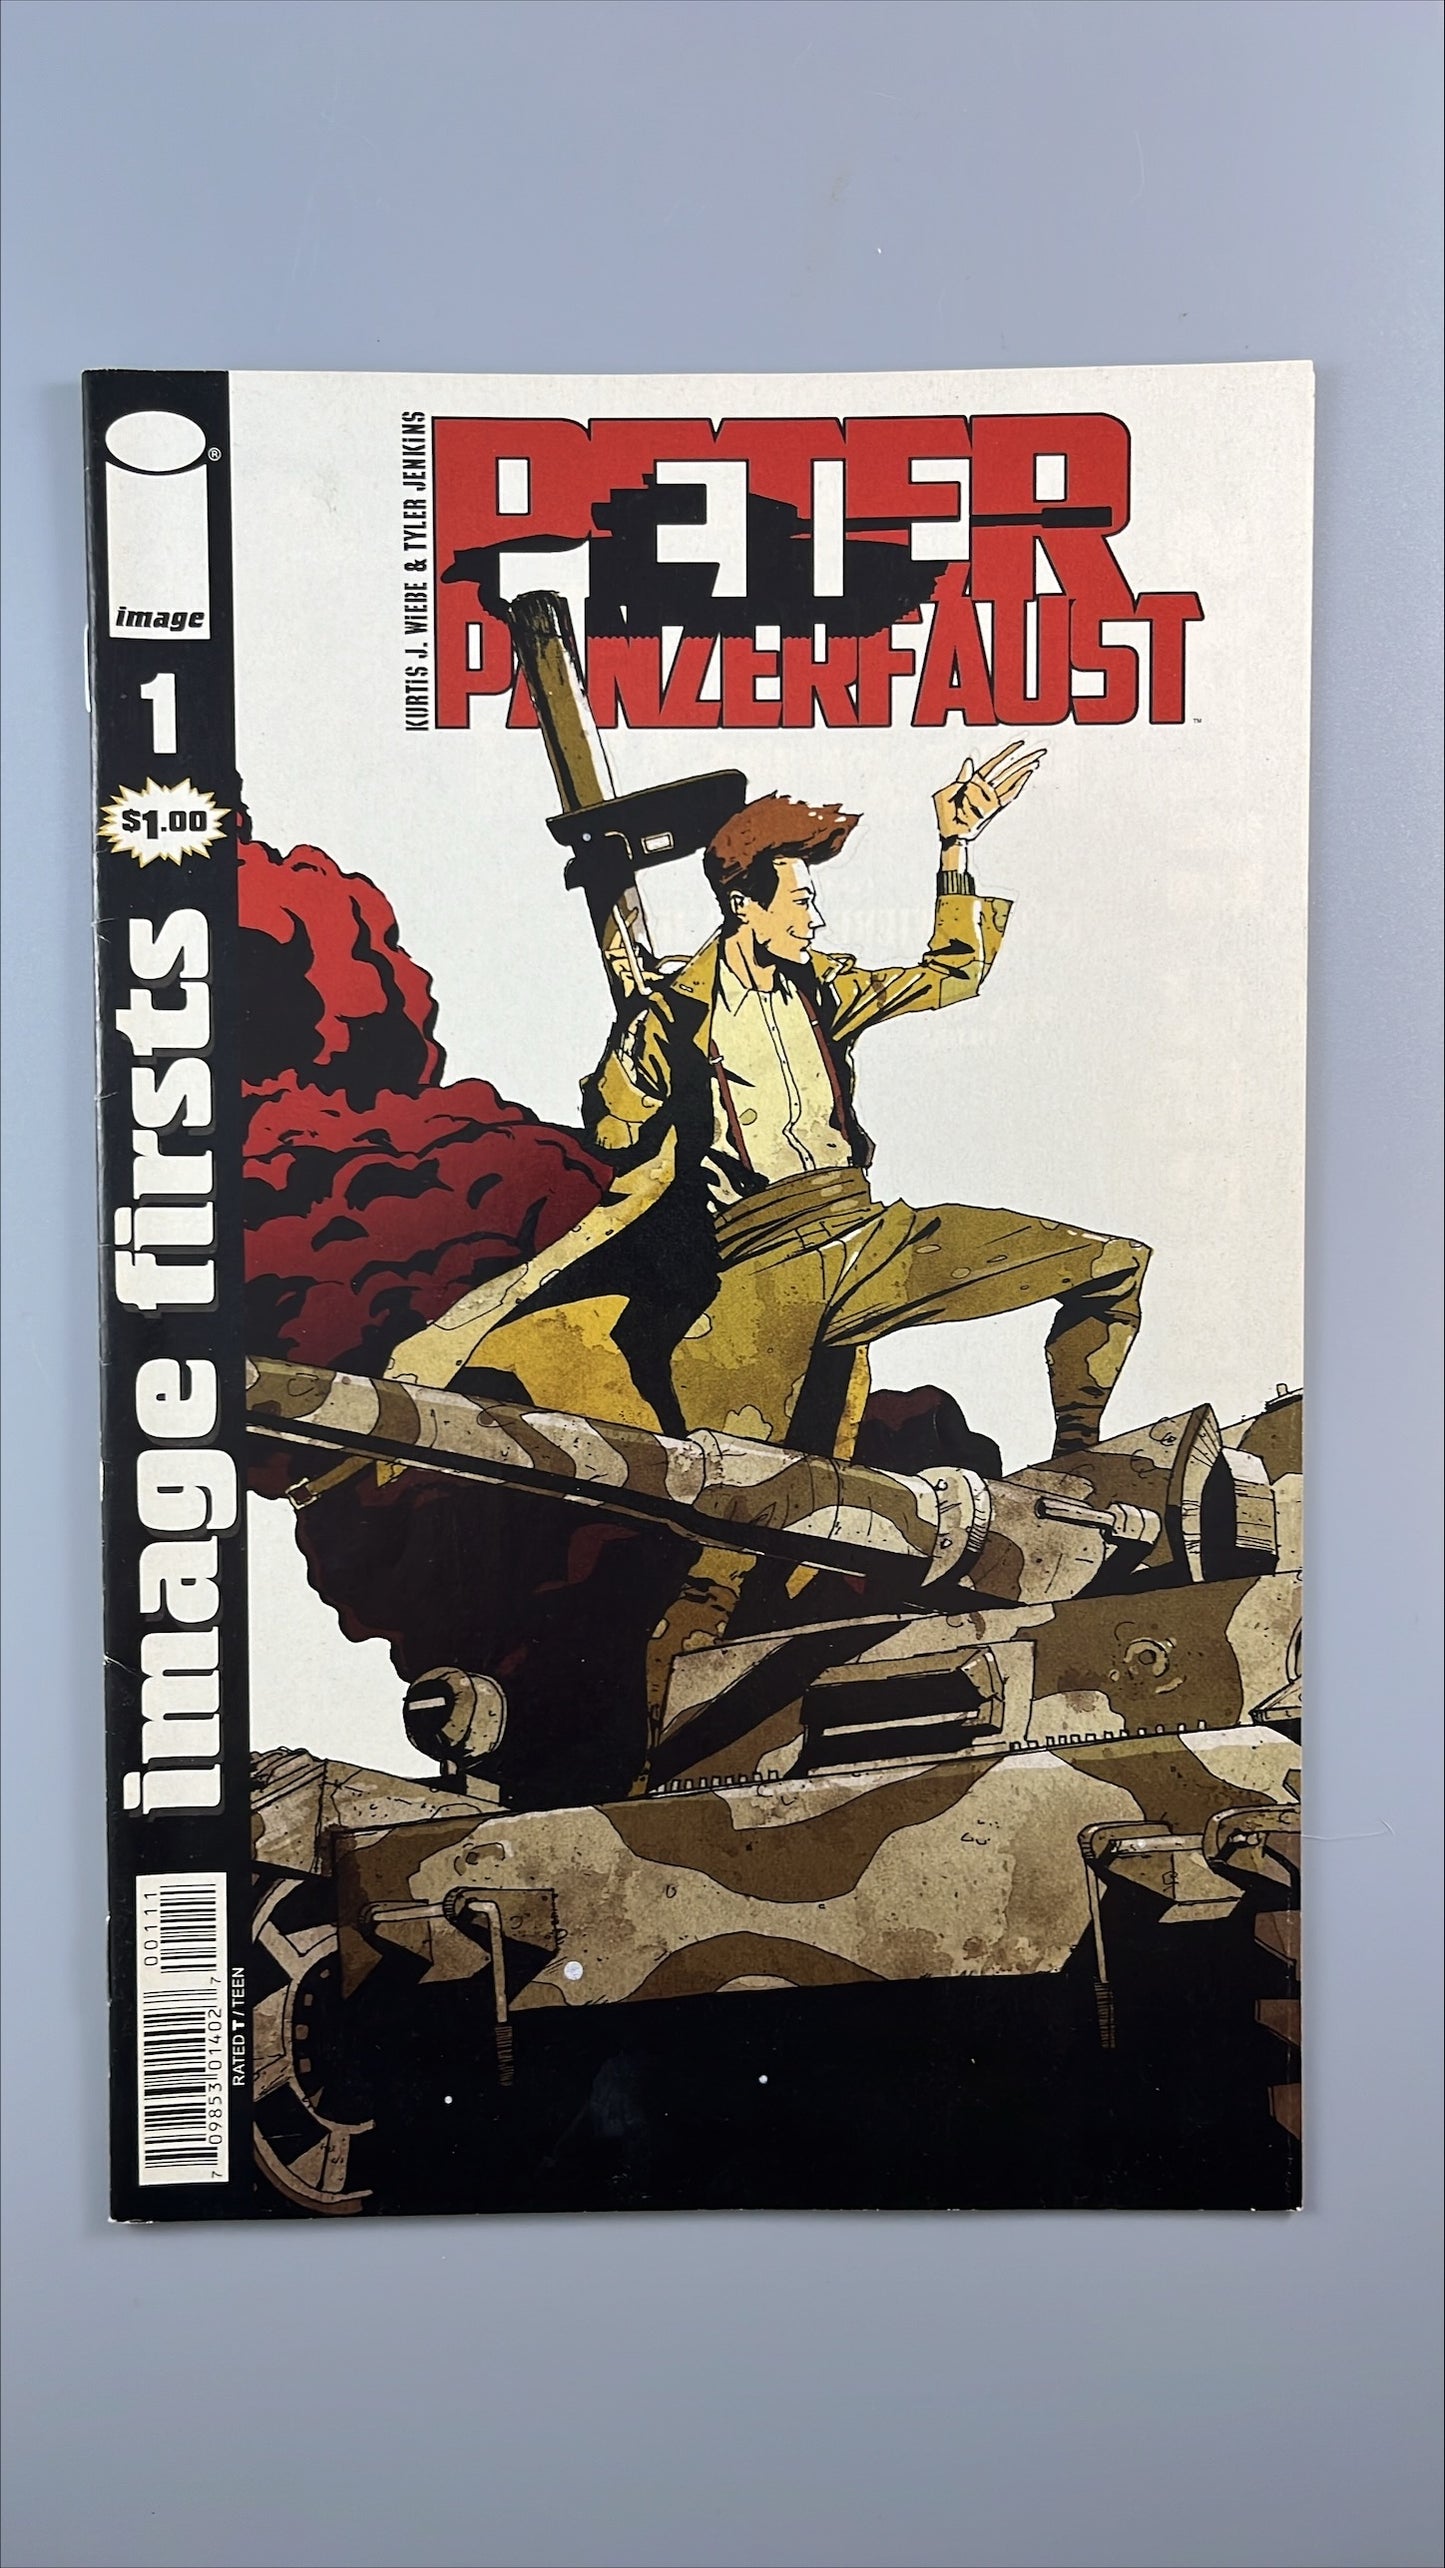 Image Firsts: Peter Panzerfaust